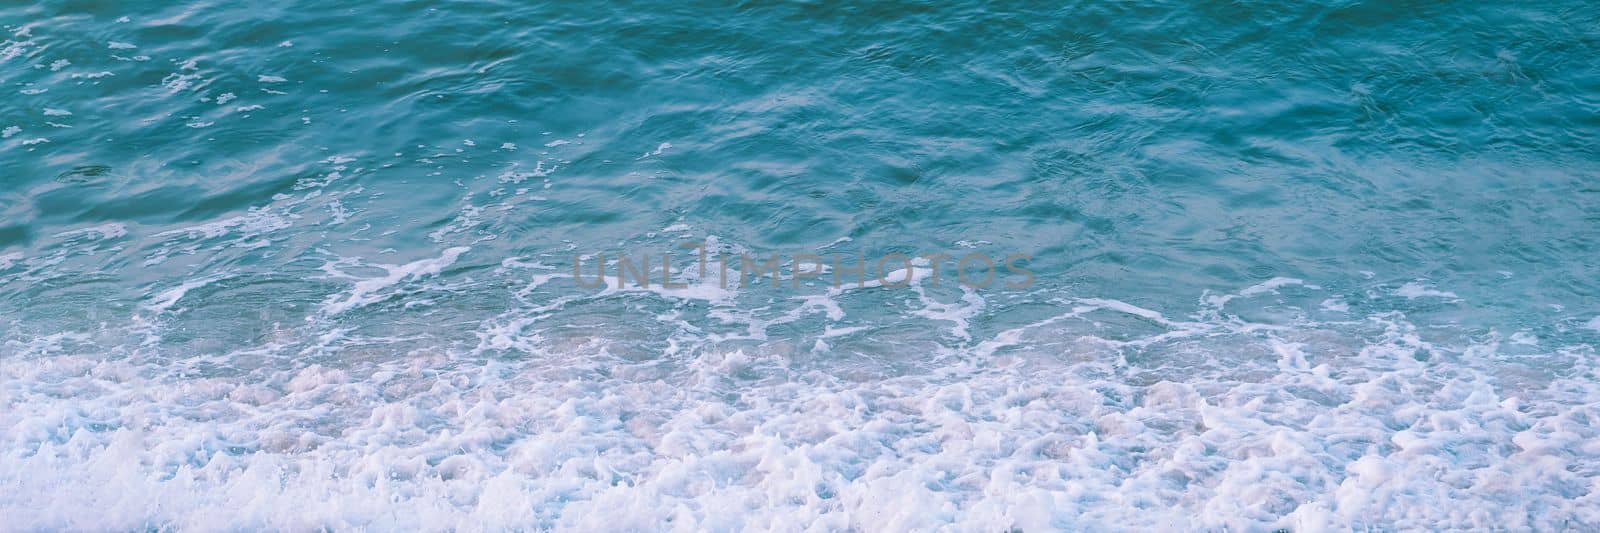 Abstract nature background Sea rippled water surface texture edge wallpaper White foam blue green turquoise by nandrey85